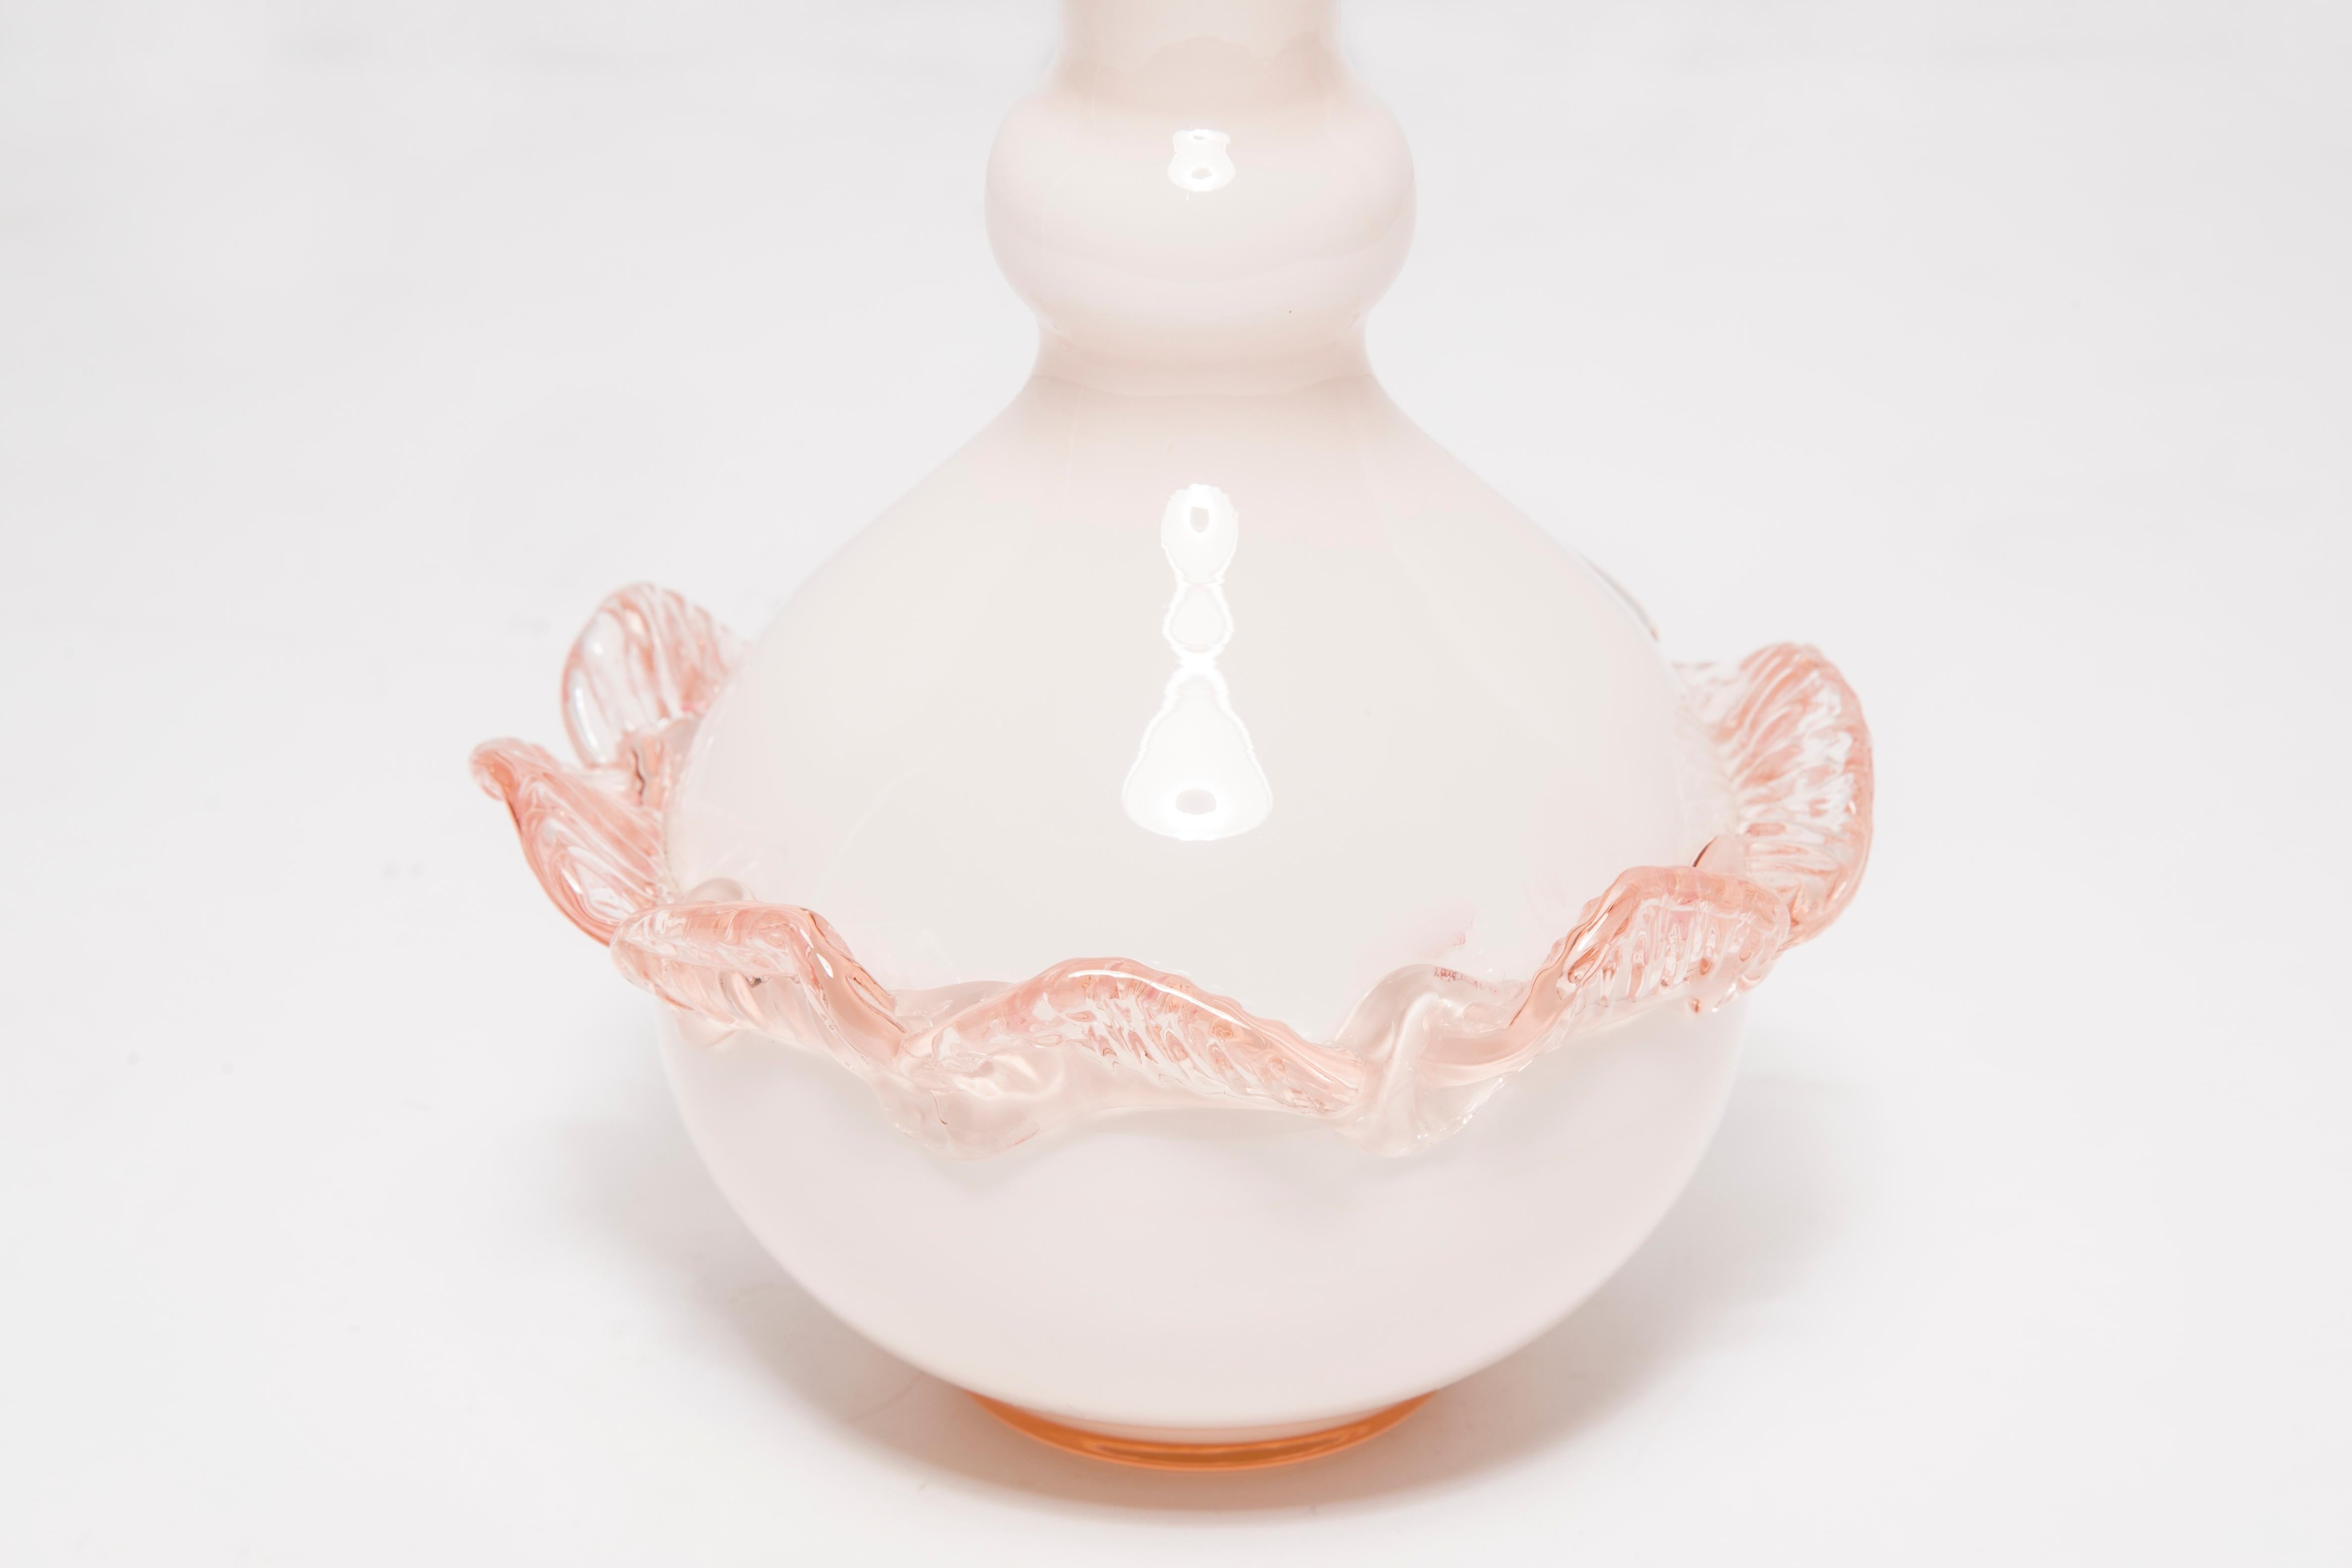 Ceramic Mid Century Murano Glass Pink Small Vase with a Frill, Italy, Europe, 1960s For Sale